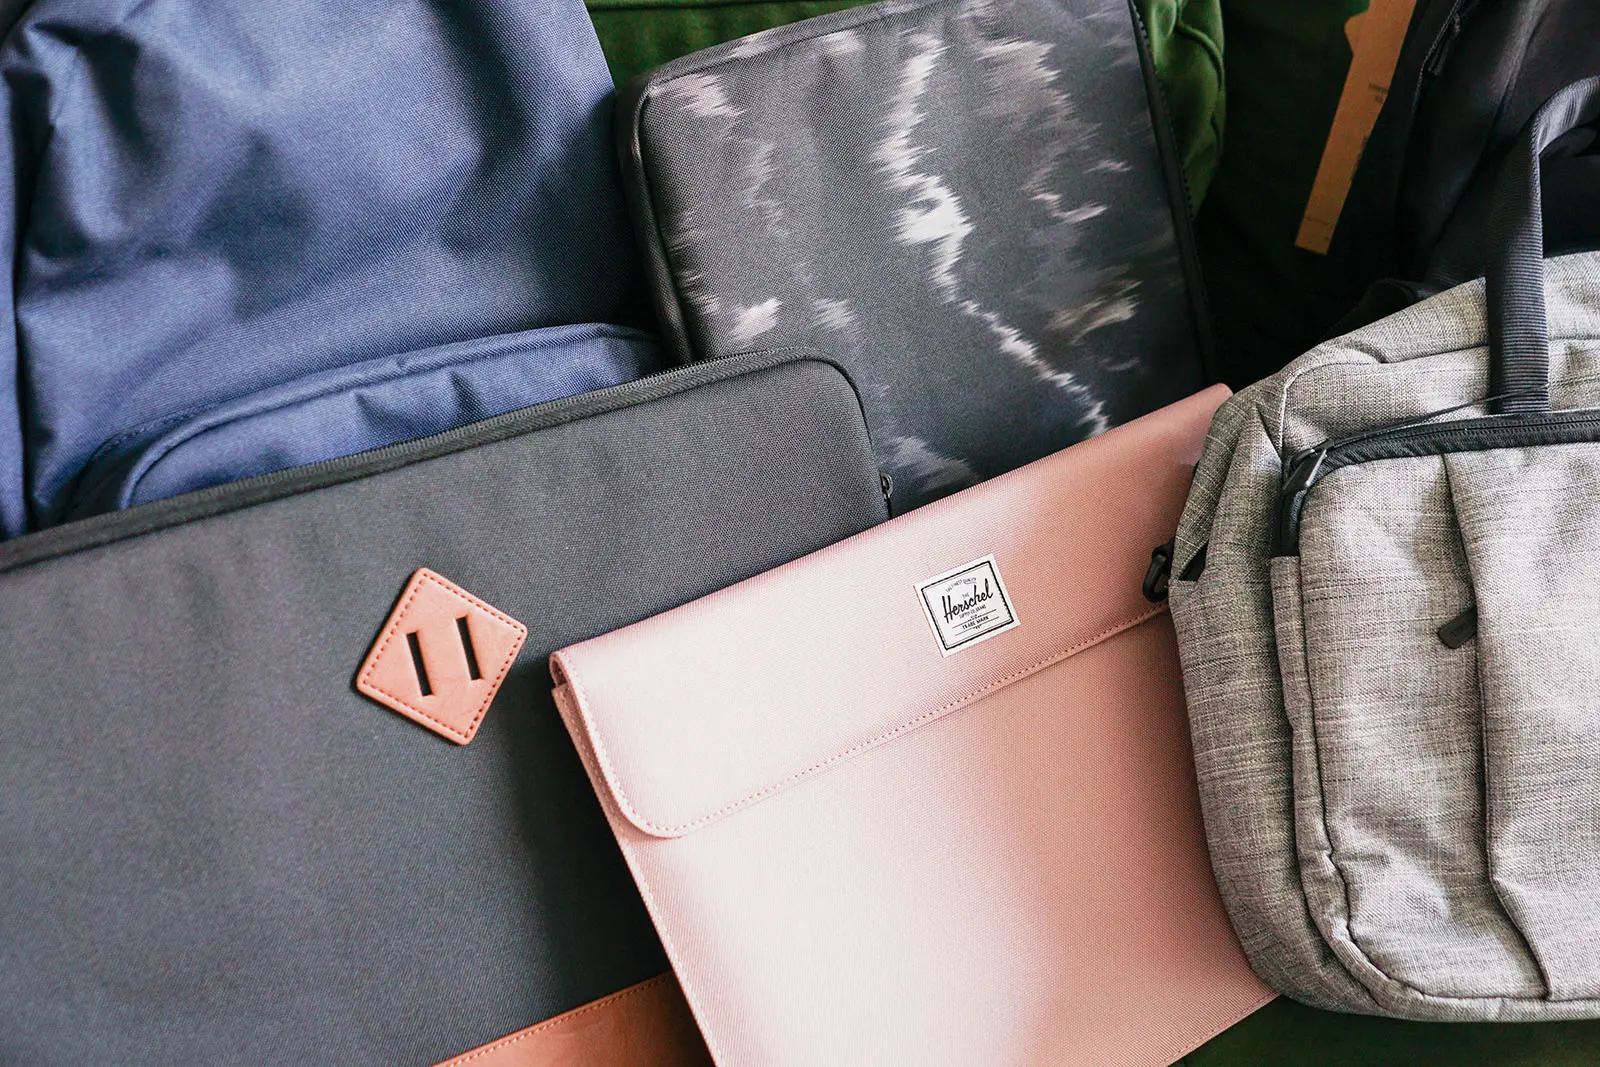 Herschel laptop sleeves and bags review